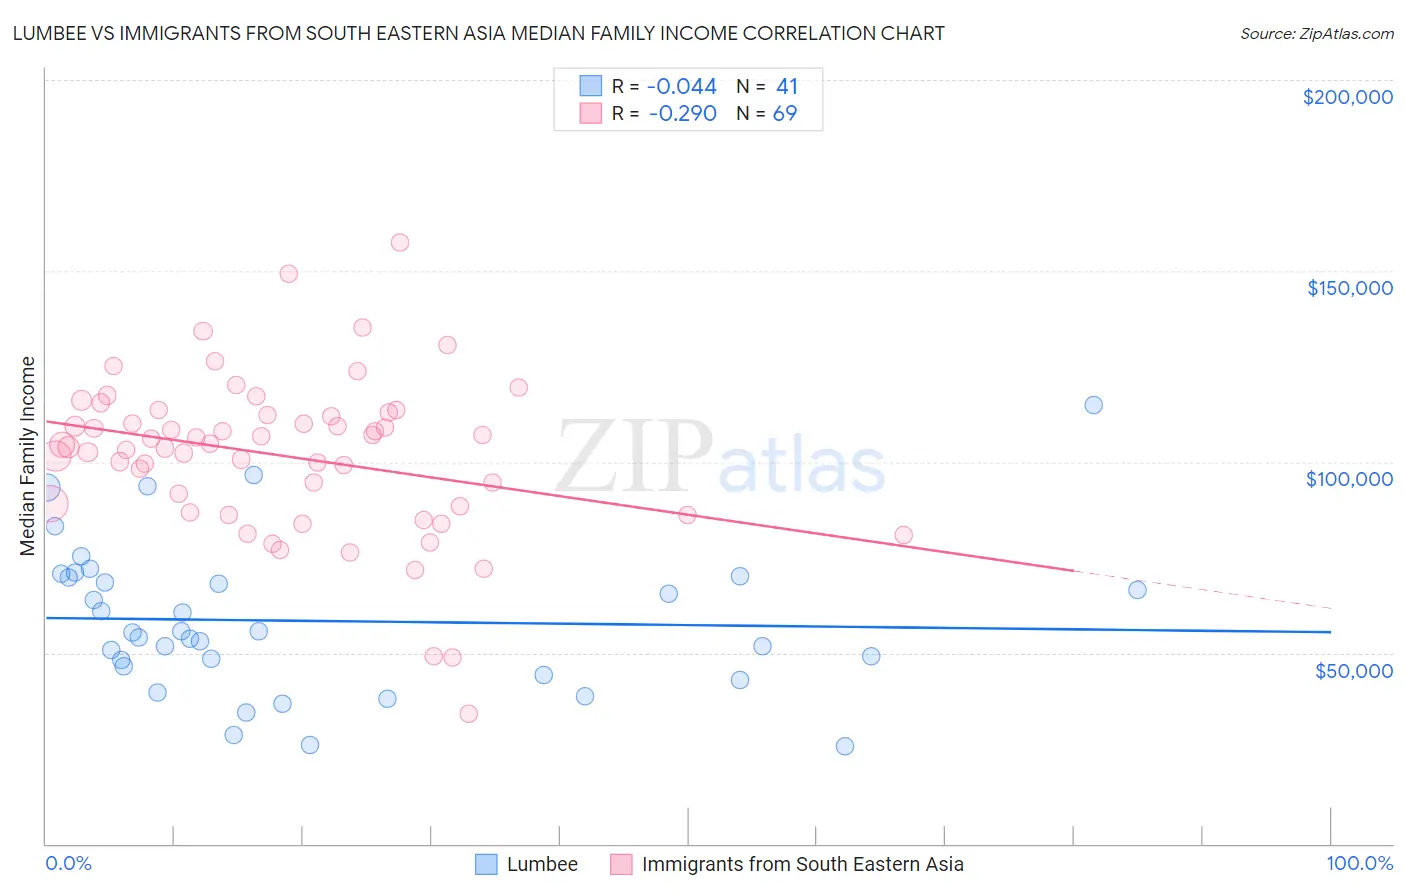 Lumbee vs Immigrants from South Eastern Asia Median Family Income